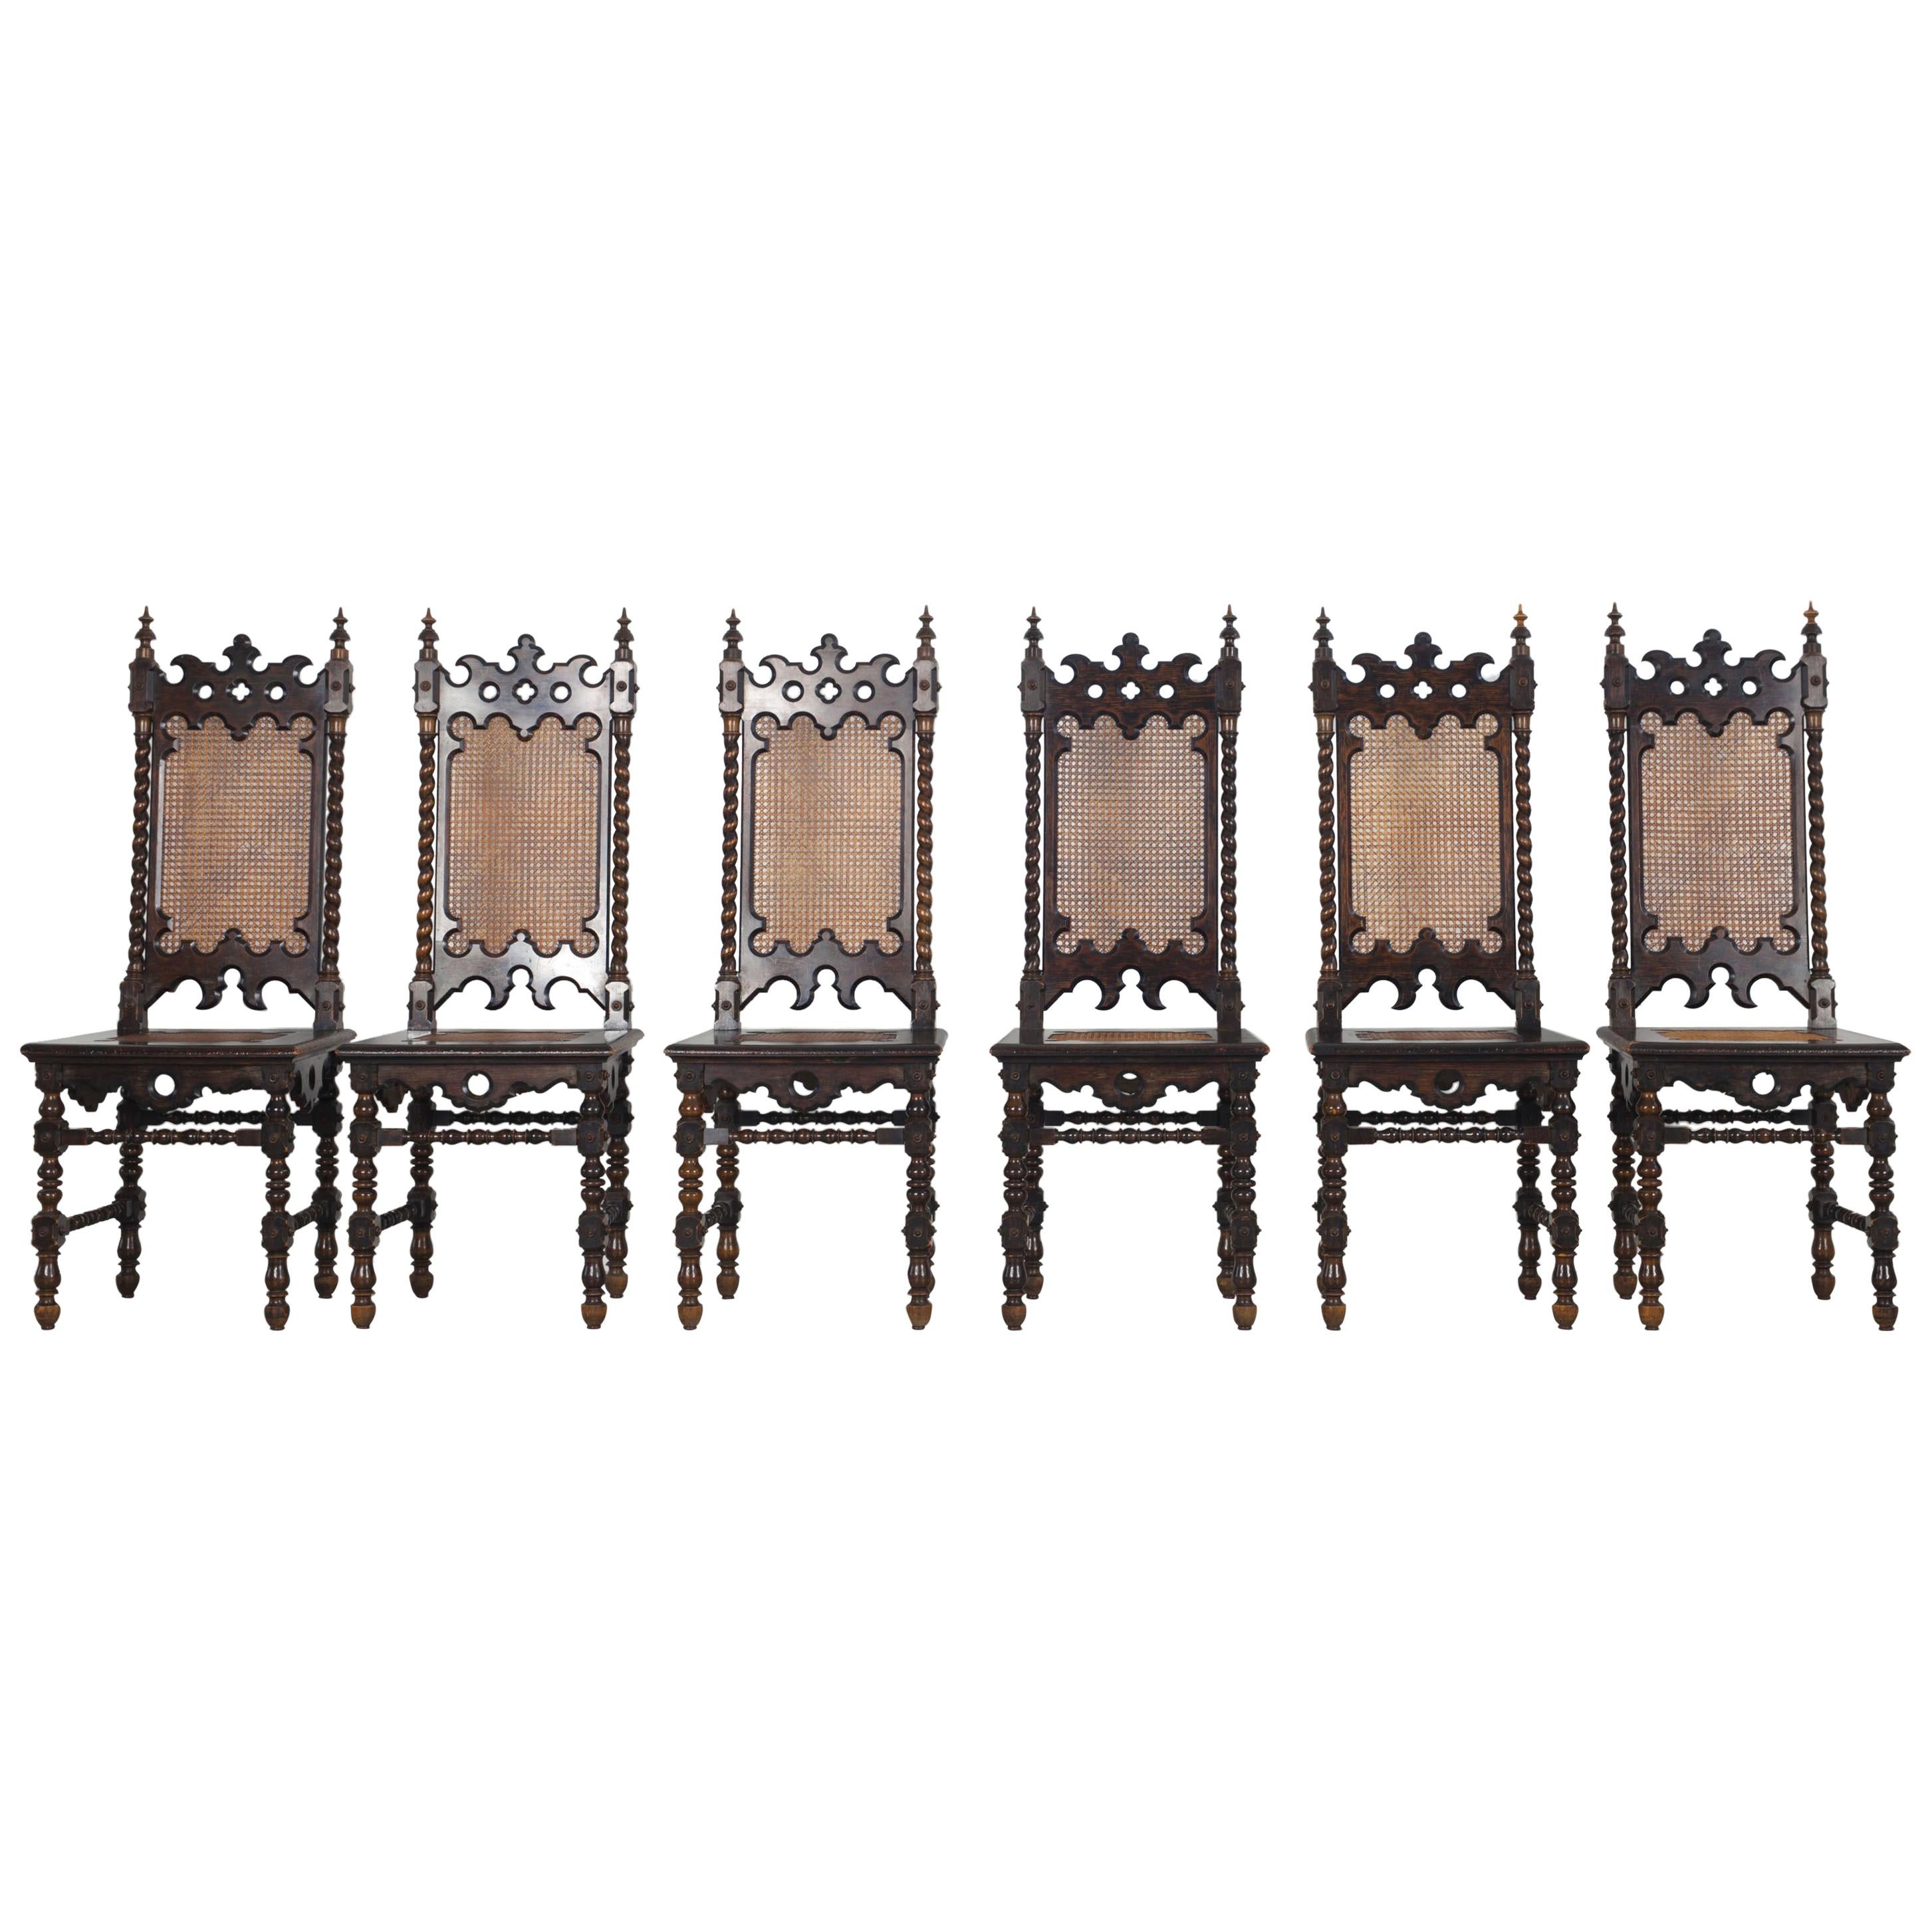 Set of 6 Original Gothic Revival Chairs of the 19th Century